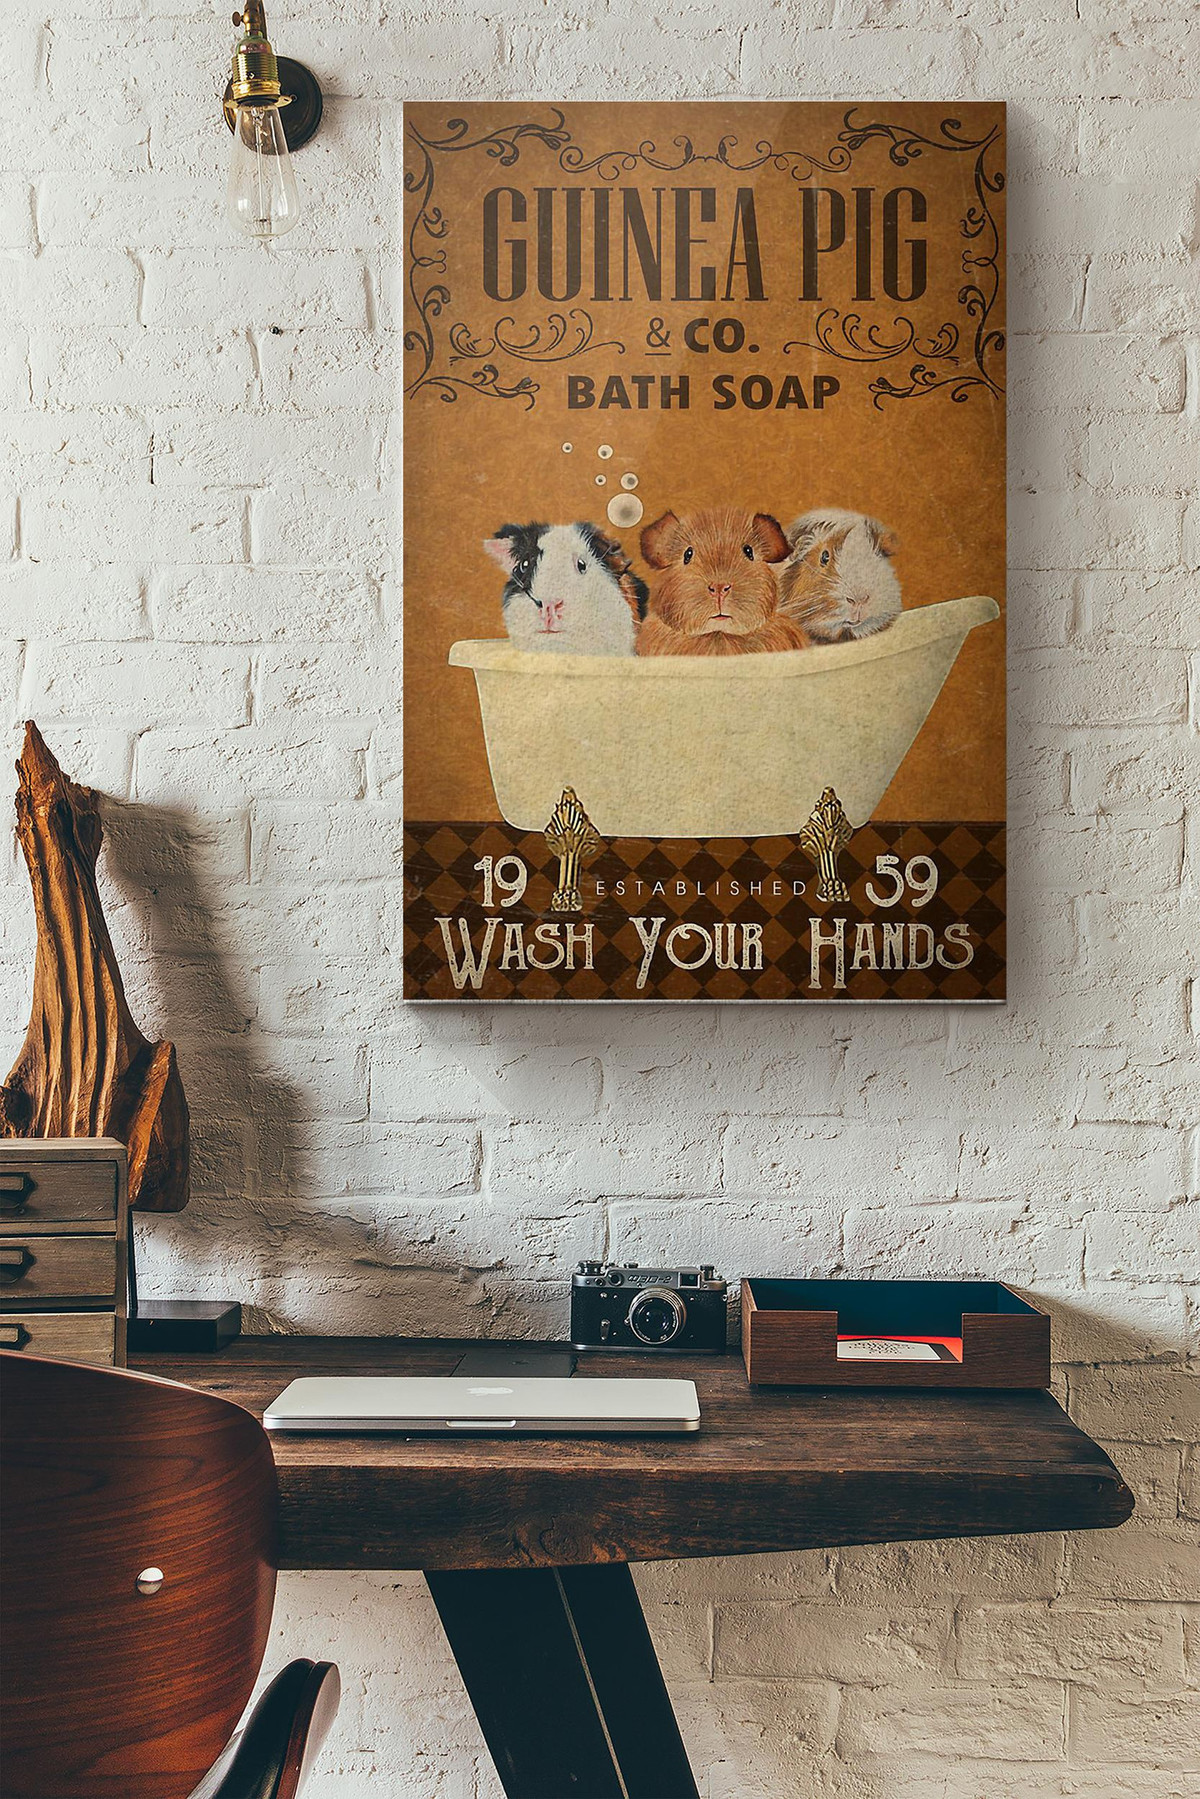 Guinea Pig Company Bath Soap Wash Your Hands Canvas Painting Ideas, Canvas Hanging Prints, Gift Idea Framed Prints, Canvas Paintings Wrapped Canvas 8x10